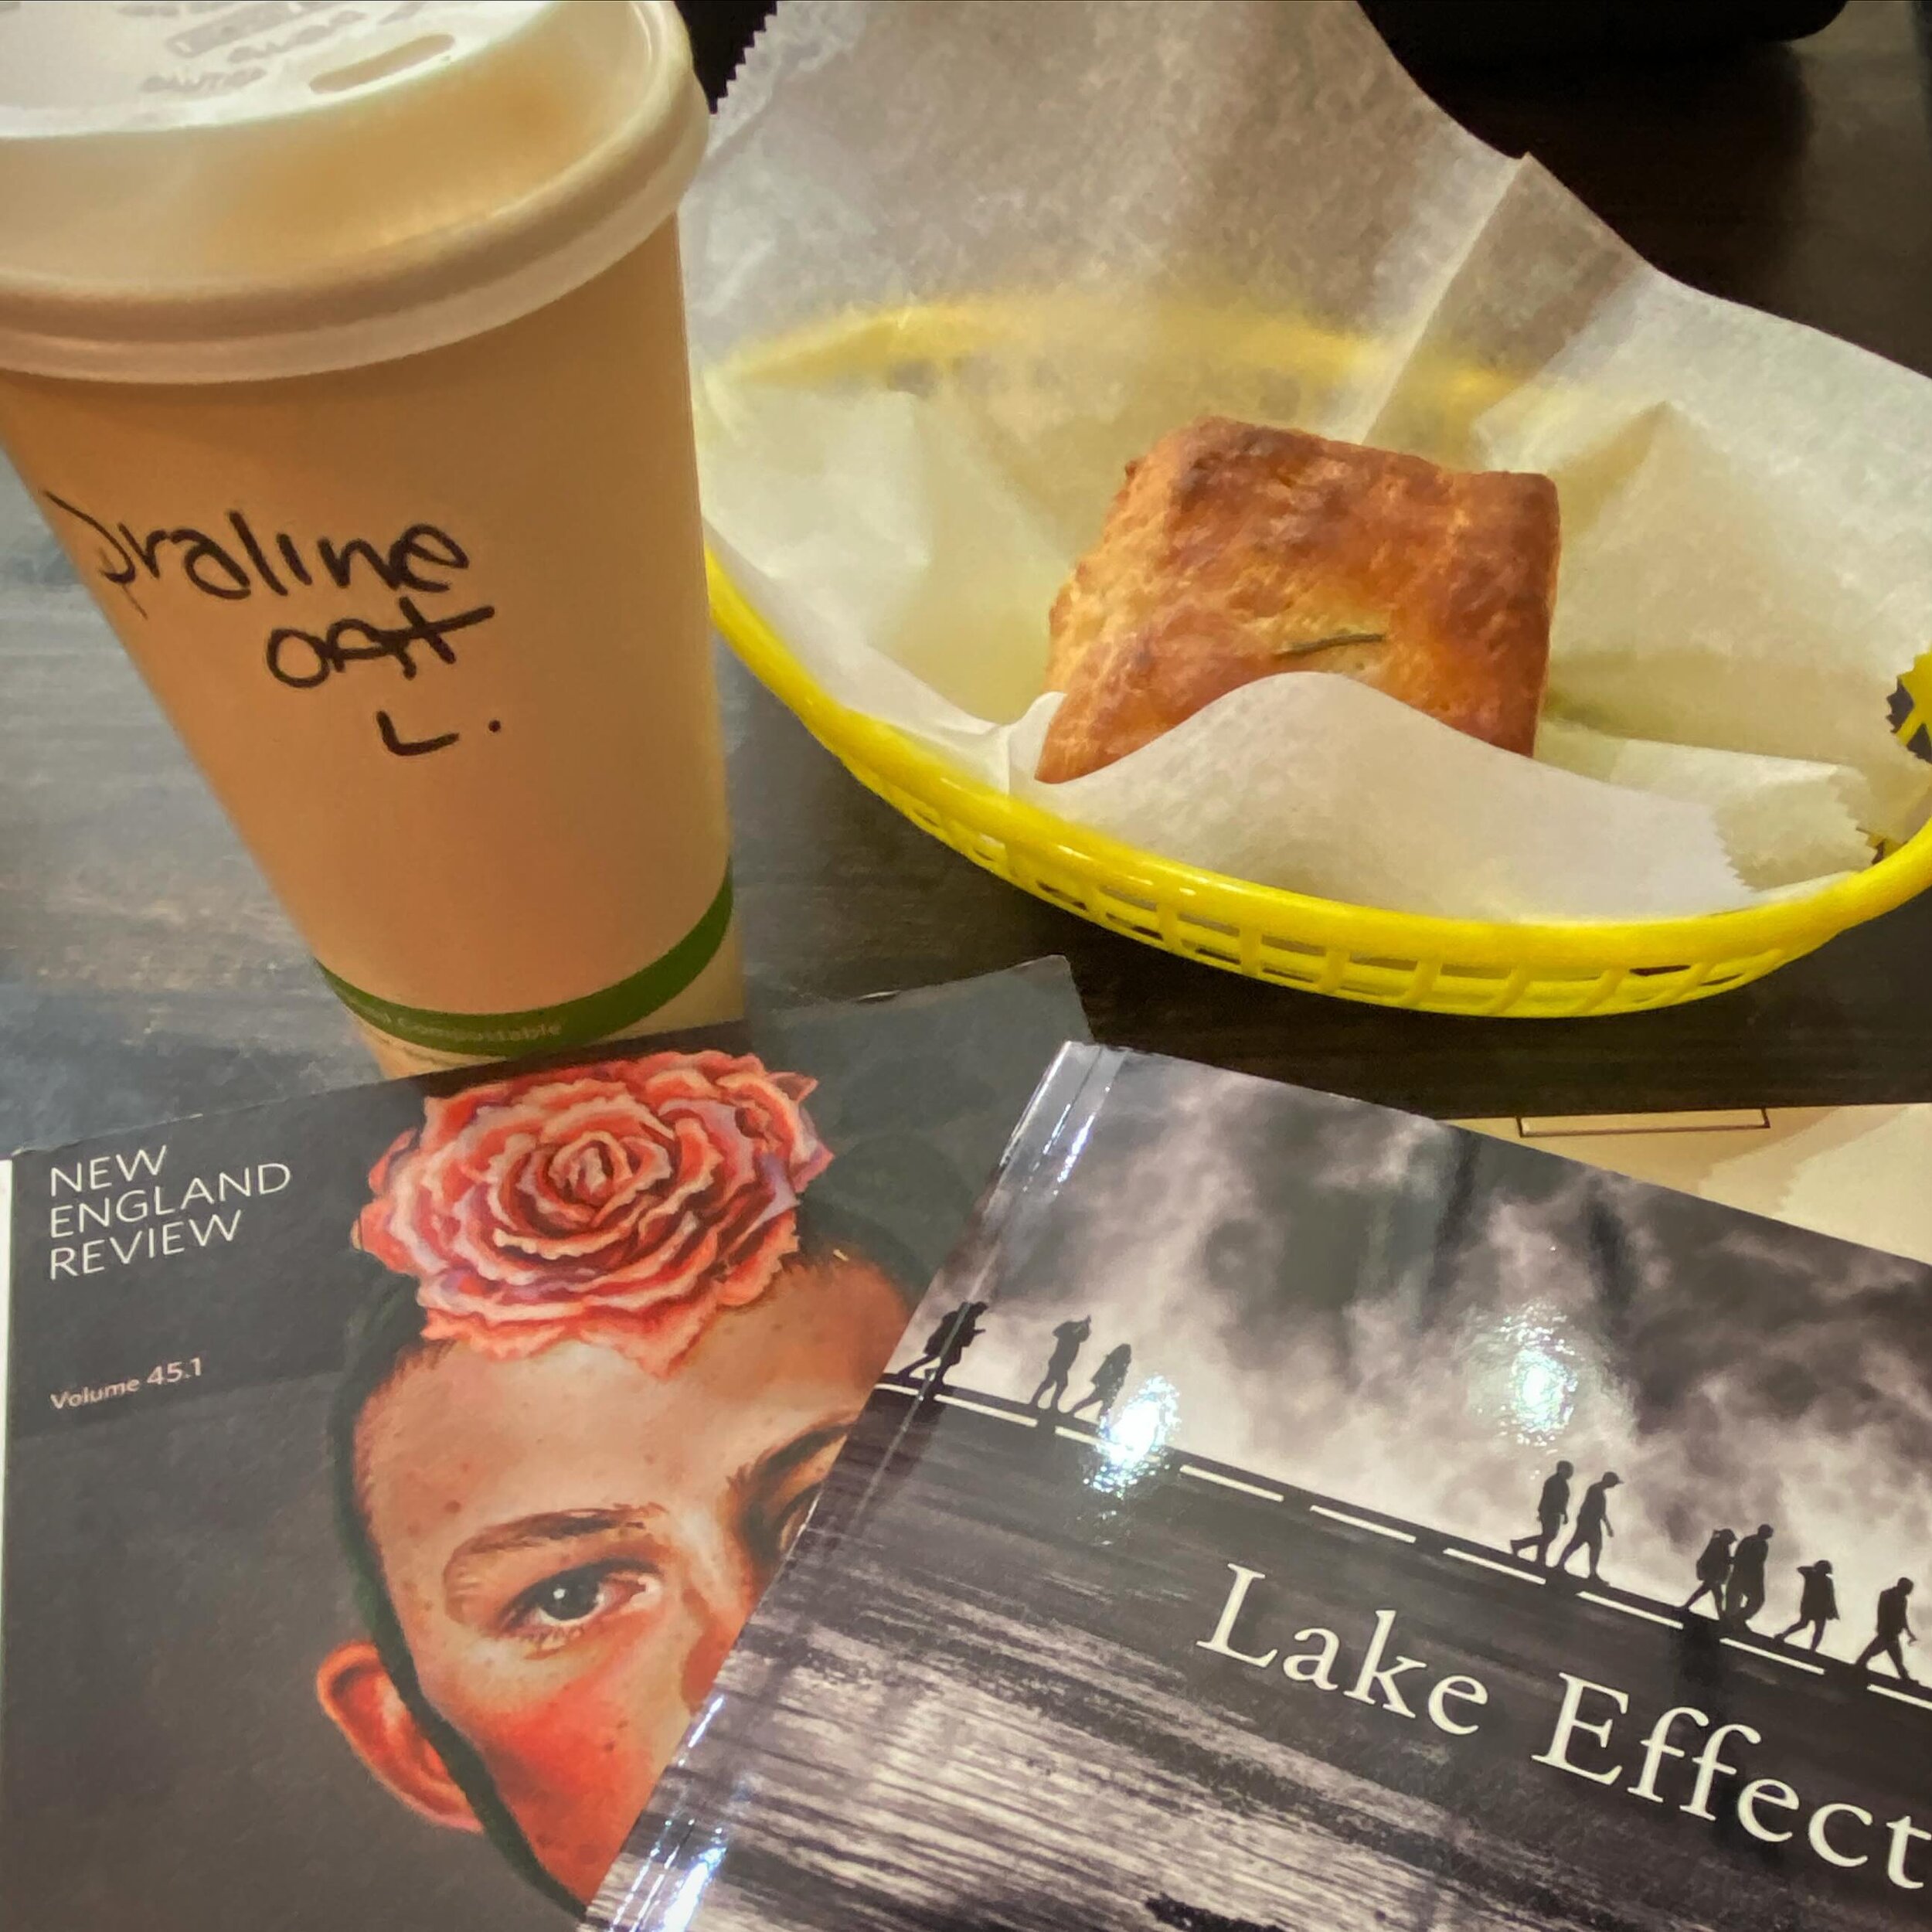 Everything smells sweet with #PrintPubPals
.
.
.
#fictionmag #FICTIONreadsfiction #litmag #printpublication #printpubpals #LakeEffect #NewEnglandReview